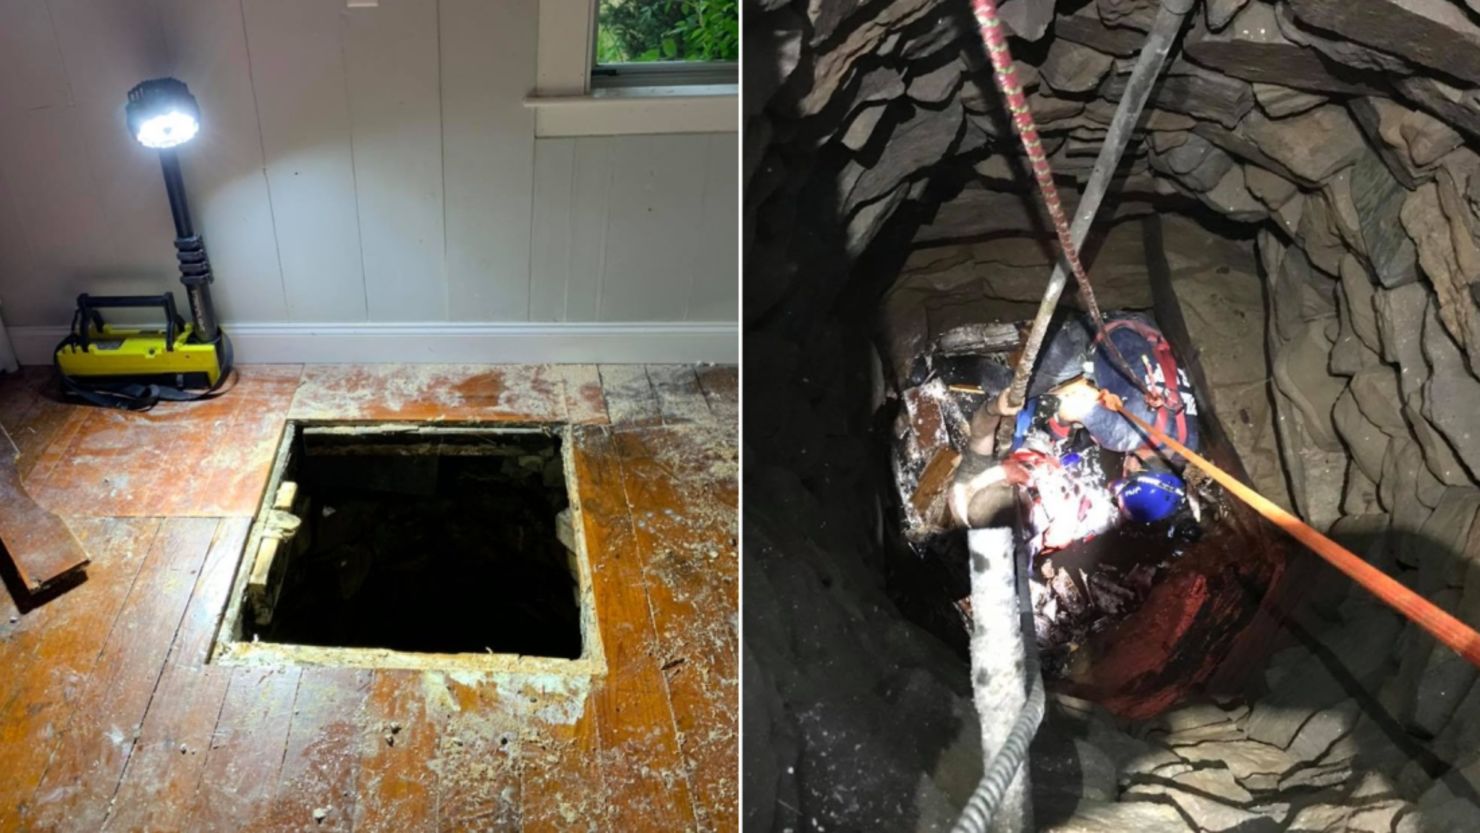 Christopher Town fell through the flooring of a Connecticut home and into the well below.